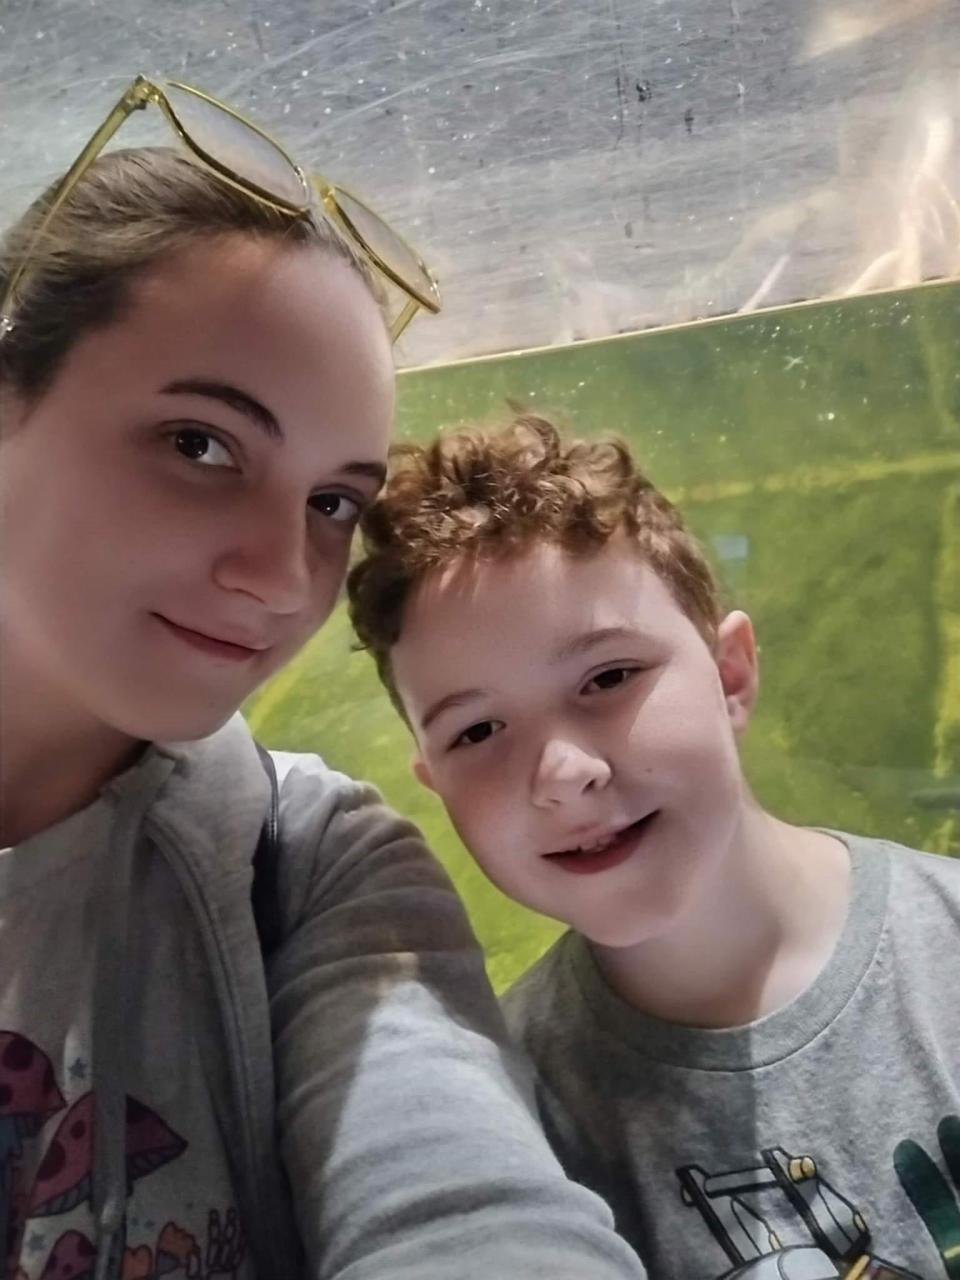 Jessica Wellman, of Amherst, Ohio, and her 10-year-old son Dominic are seen here on Mother's Day 2022. After working for a Ford Motor Co. supplier for six years, she started building trucks at the Ohio Assembly Plant in January 2022. As a seven-year member of UAW Local 2000, she just learned she's moving from a temporary to permanent employee.